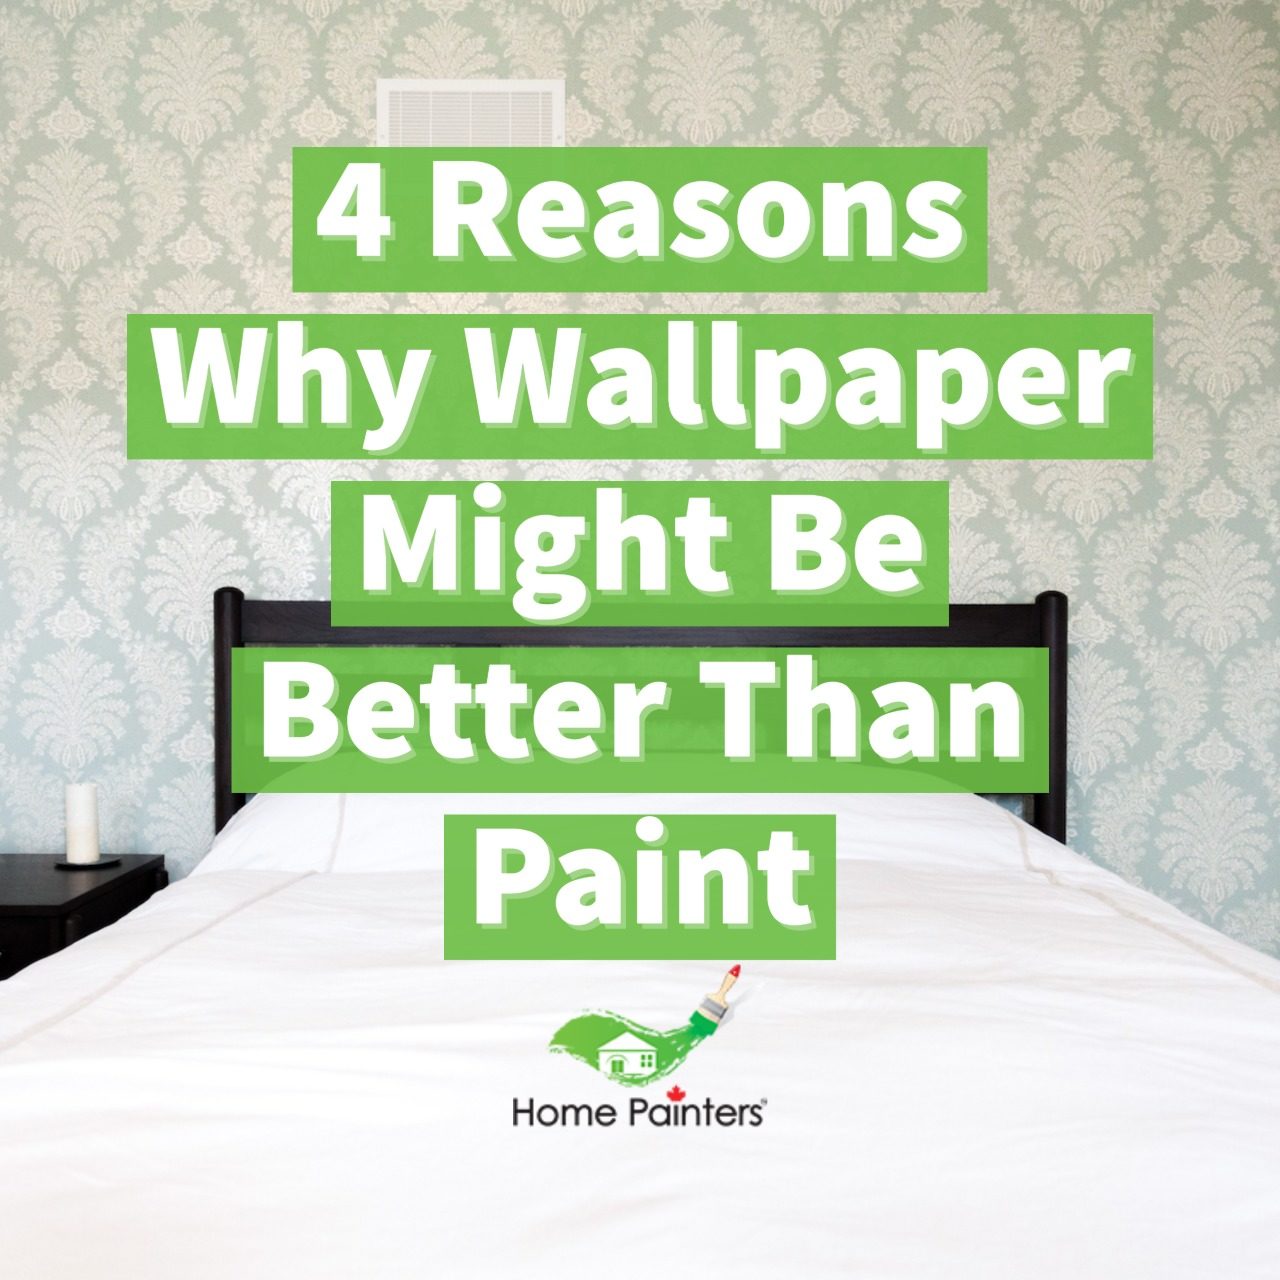 4 Reasons Why Wallpaper Might Be Better Than Paint - HPT Blog